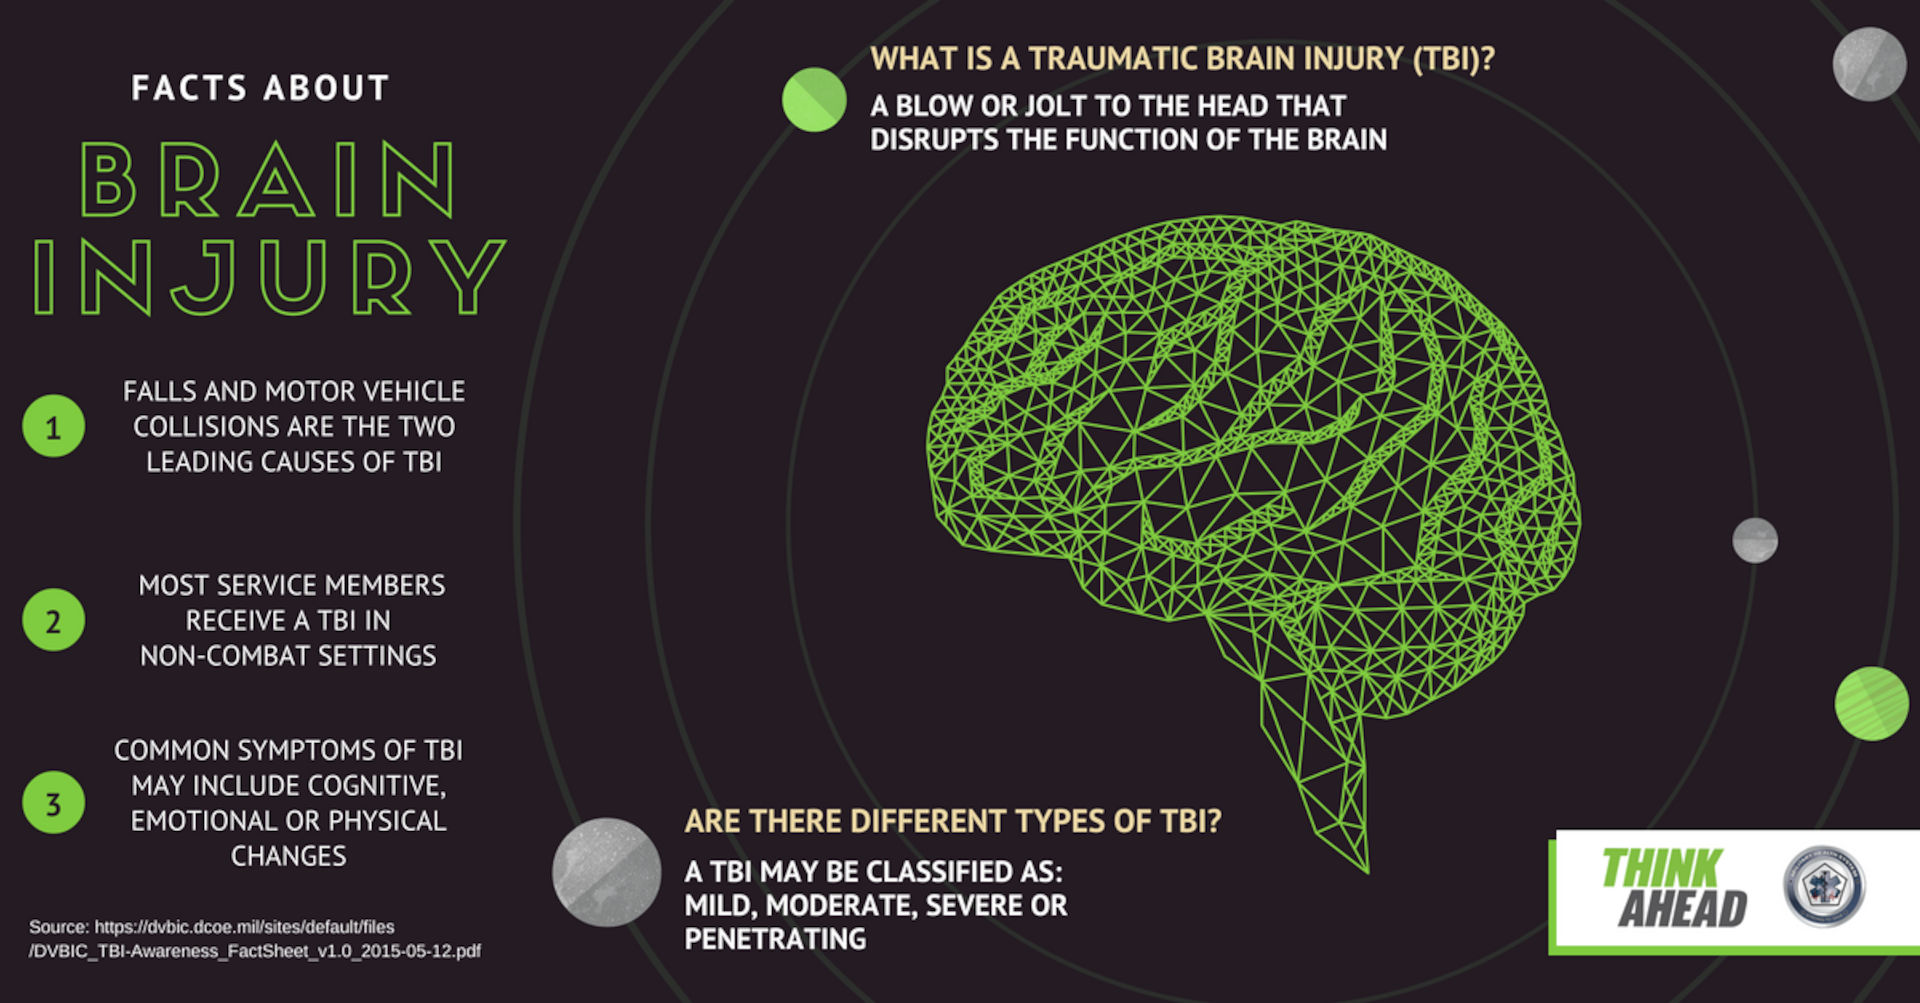 March is Traumatic Brain Injury Awareness Month. Make yourself aware of the signs and symptoms that you or someone else may be suffering from this invisible injury.